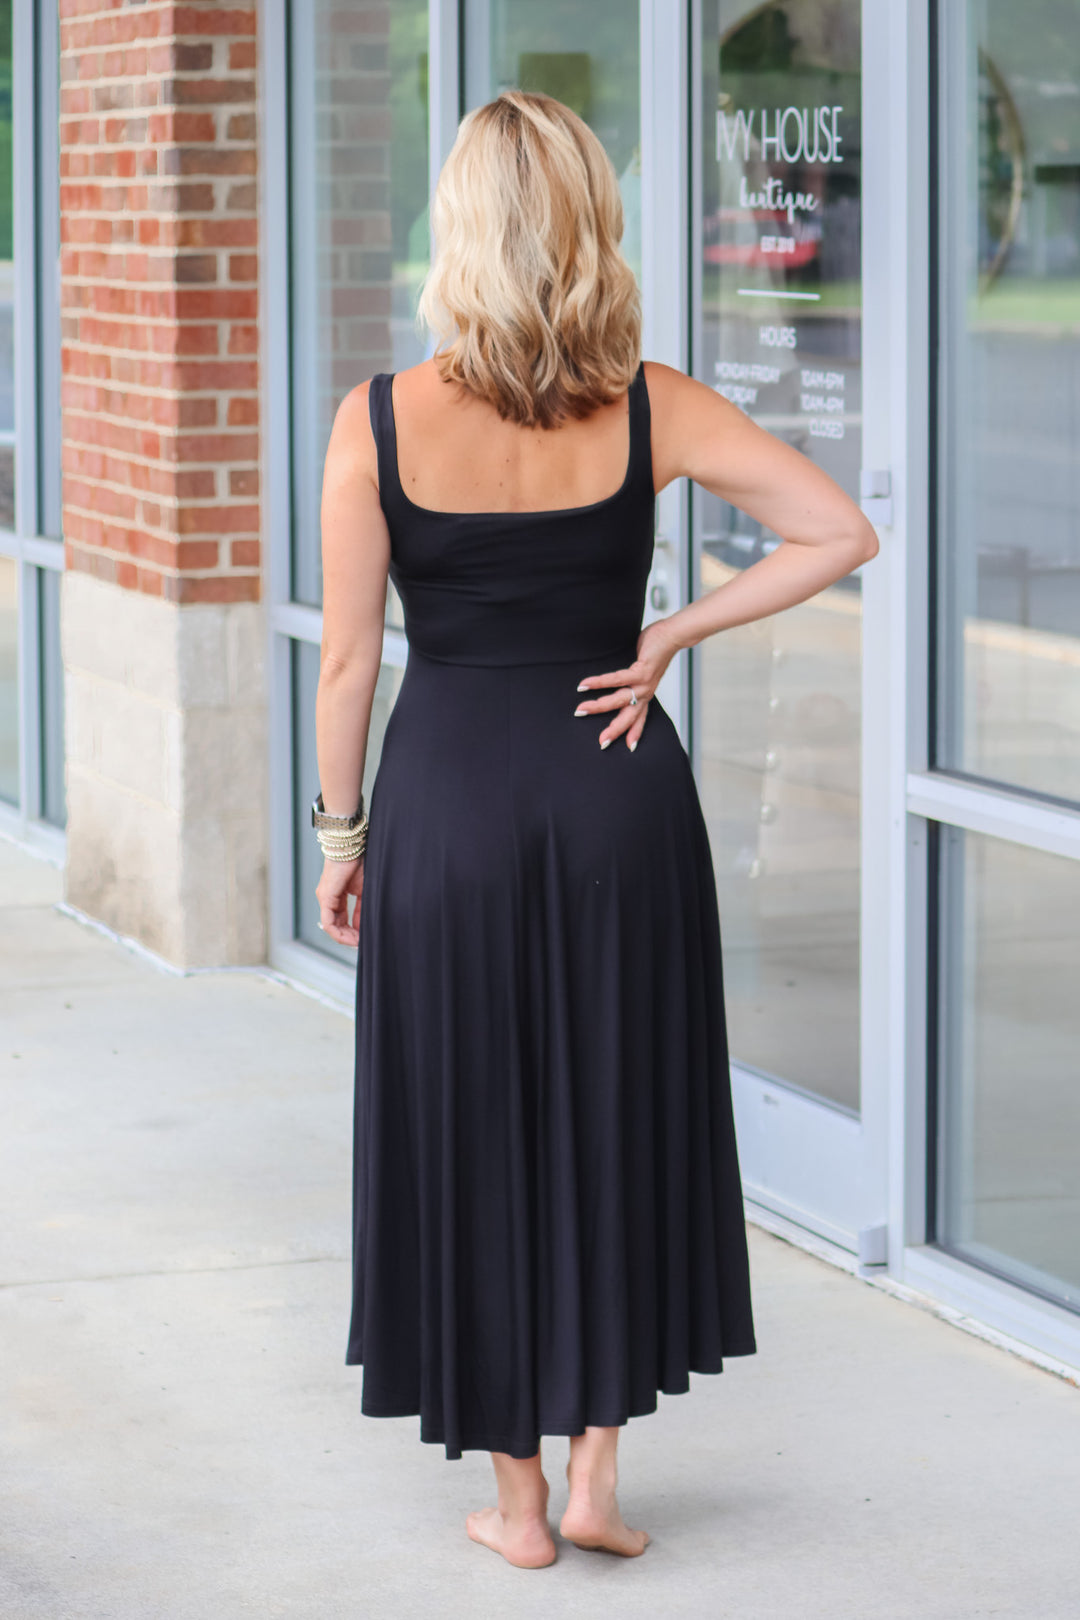 A blonde woman wearing a black maxi dress with a square neckline and pockets. She is standing in front of a shop.  She is rear facing.